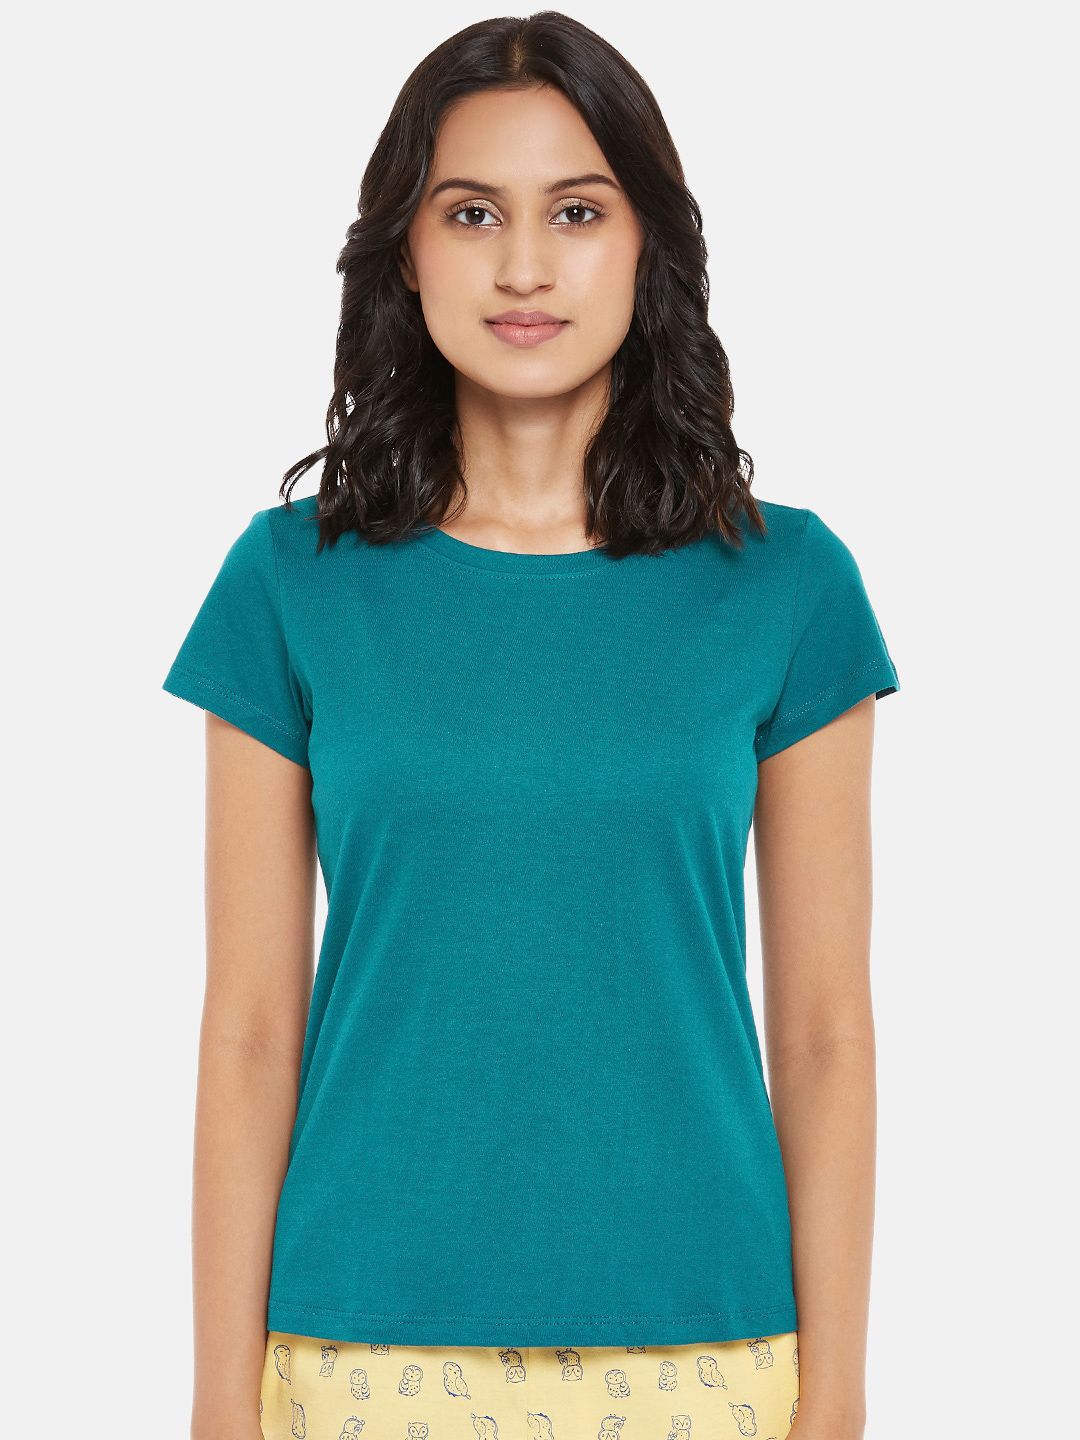 Dreamz by Pantaloons WomenTeal Regular Pure Cotton Lounge tshirt Price in India